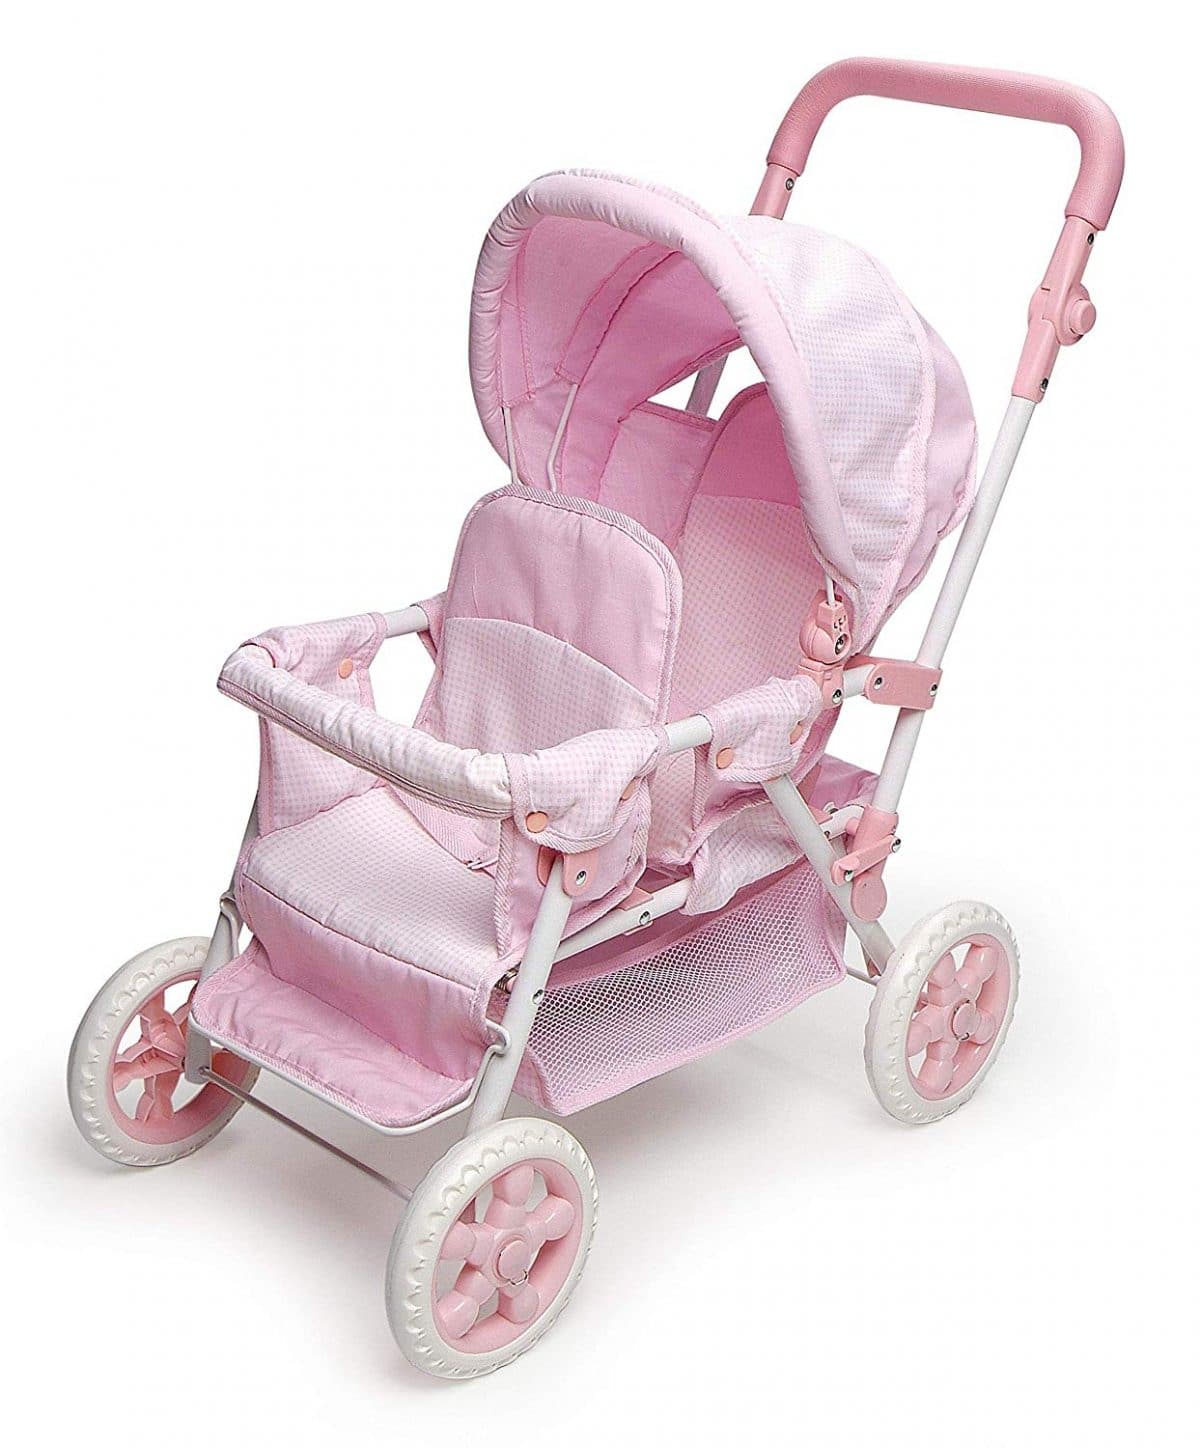 extra tall twin doll stroller